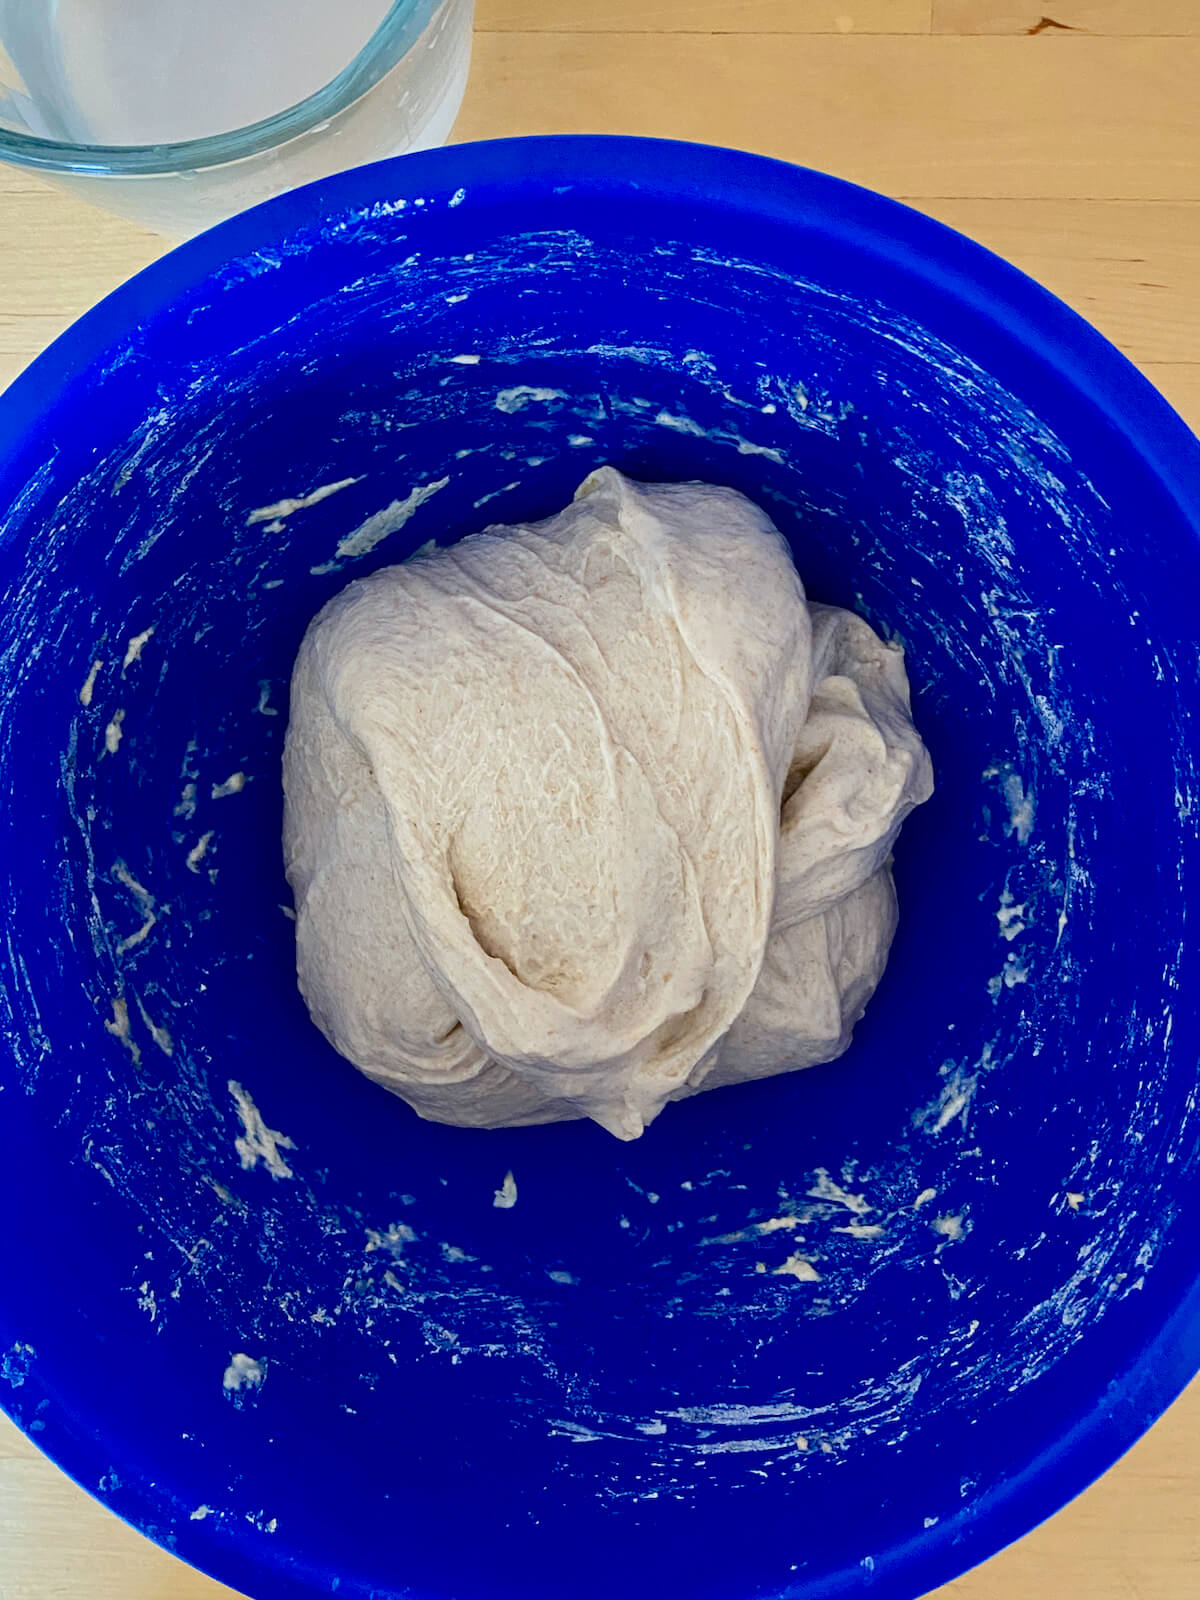 The dough after performing a set of stretch and folds.